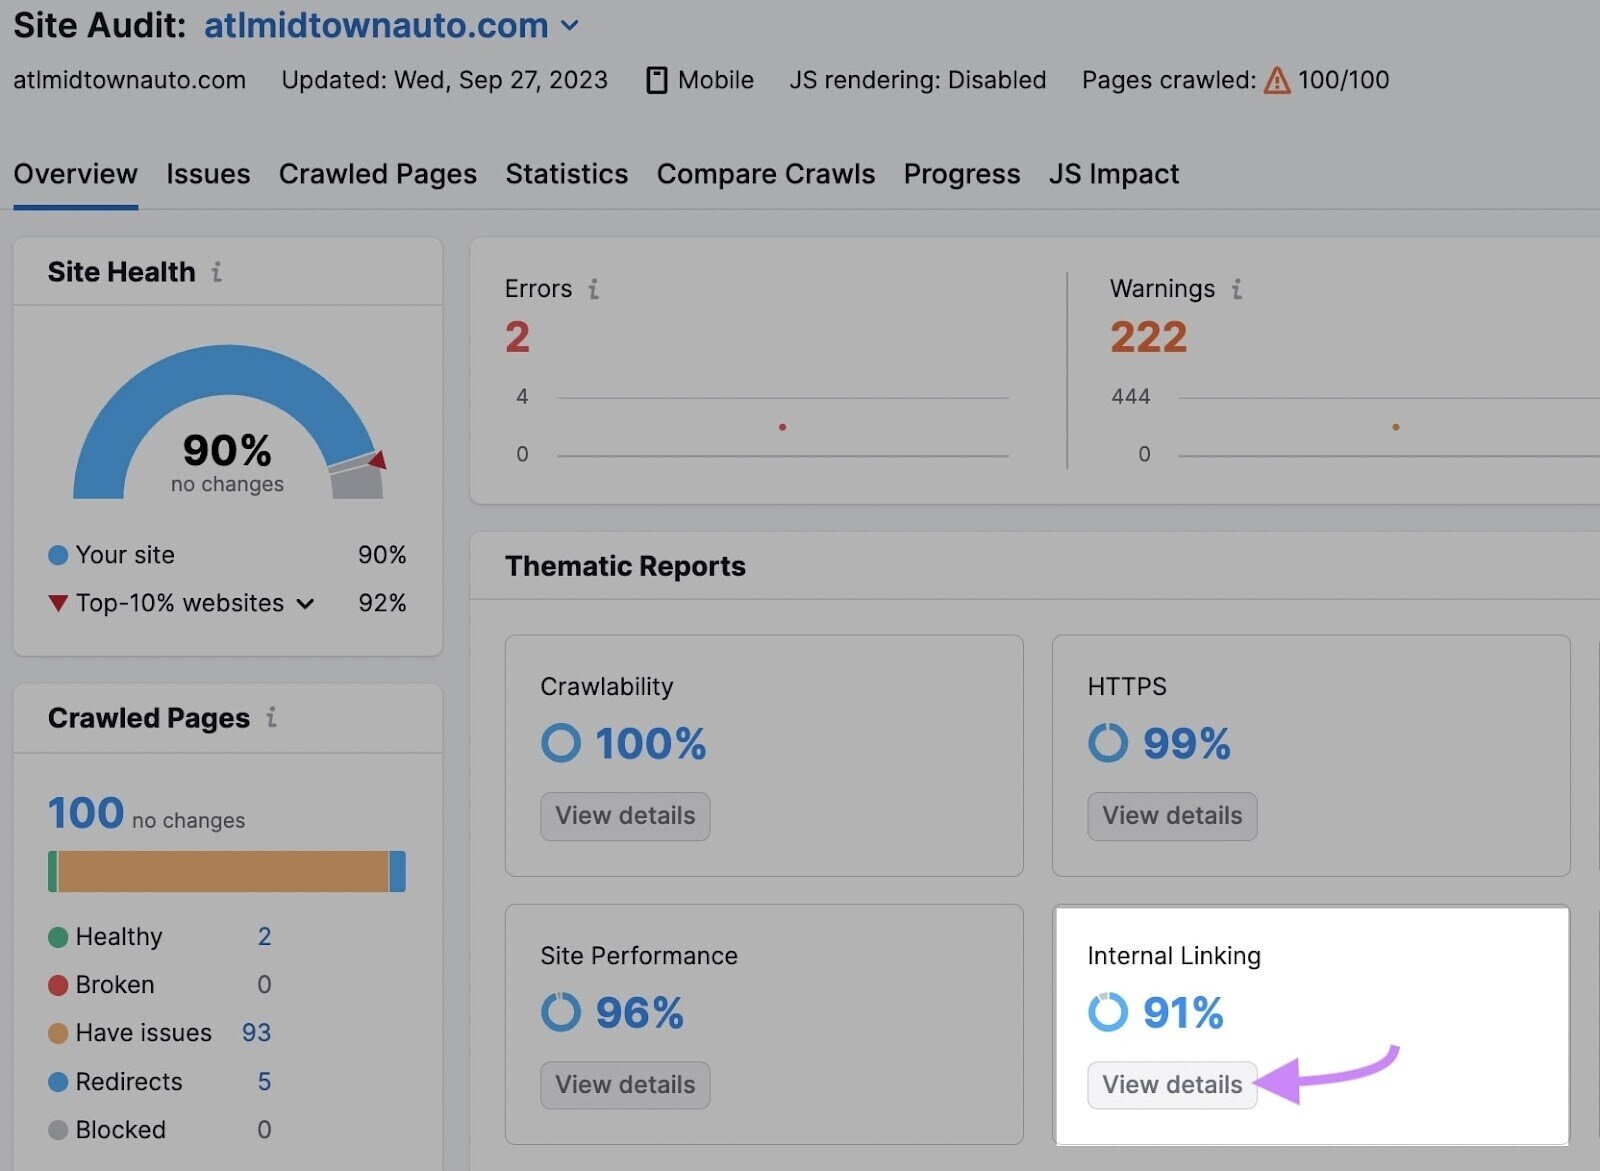 Site Audit overview dashboard with "Internal Linking" box highlighted